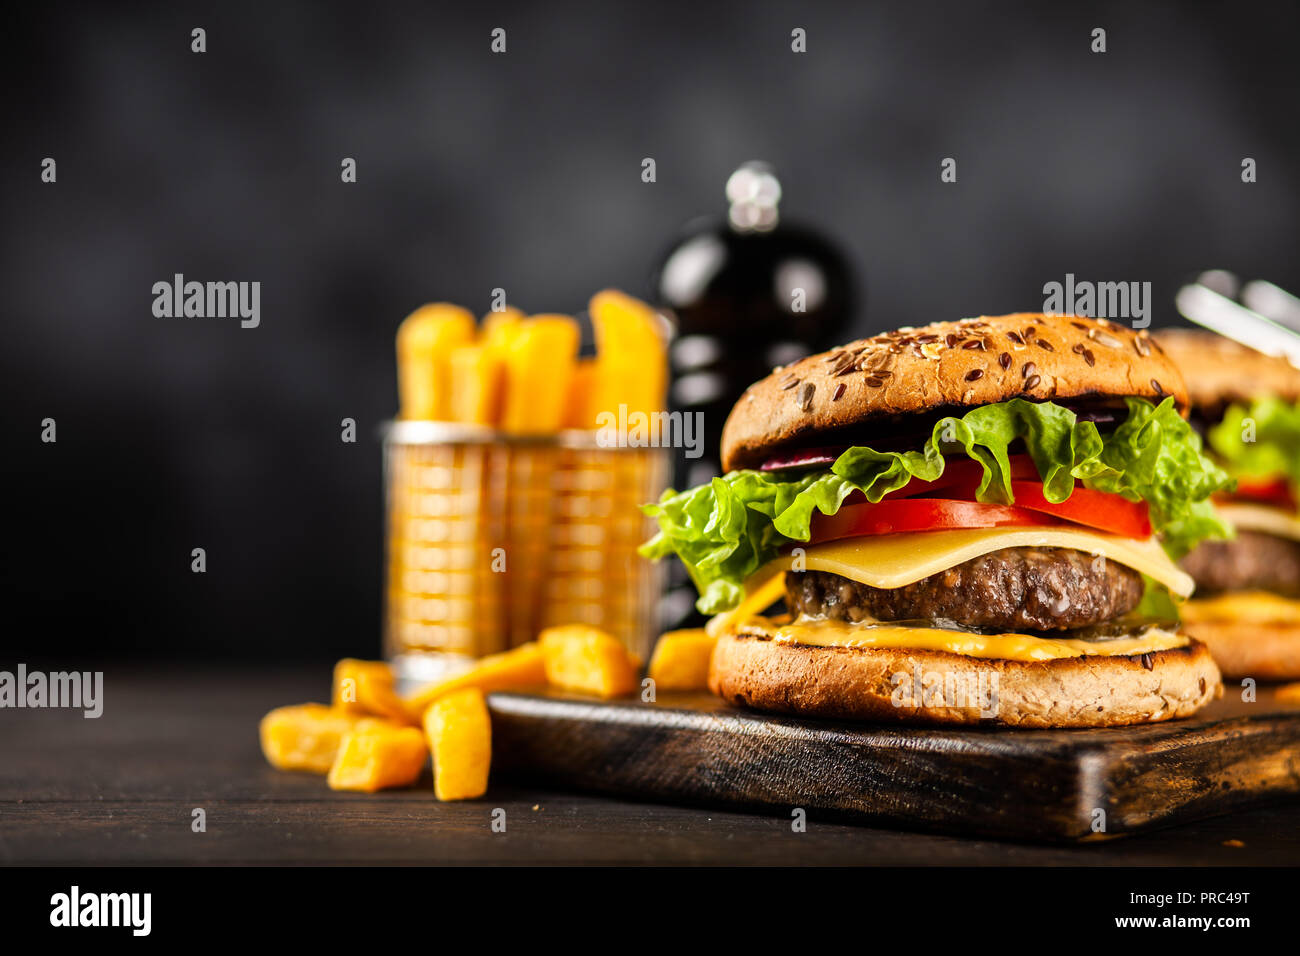 Delicious grilled burgers Stock Photo